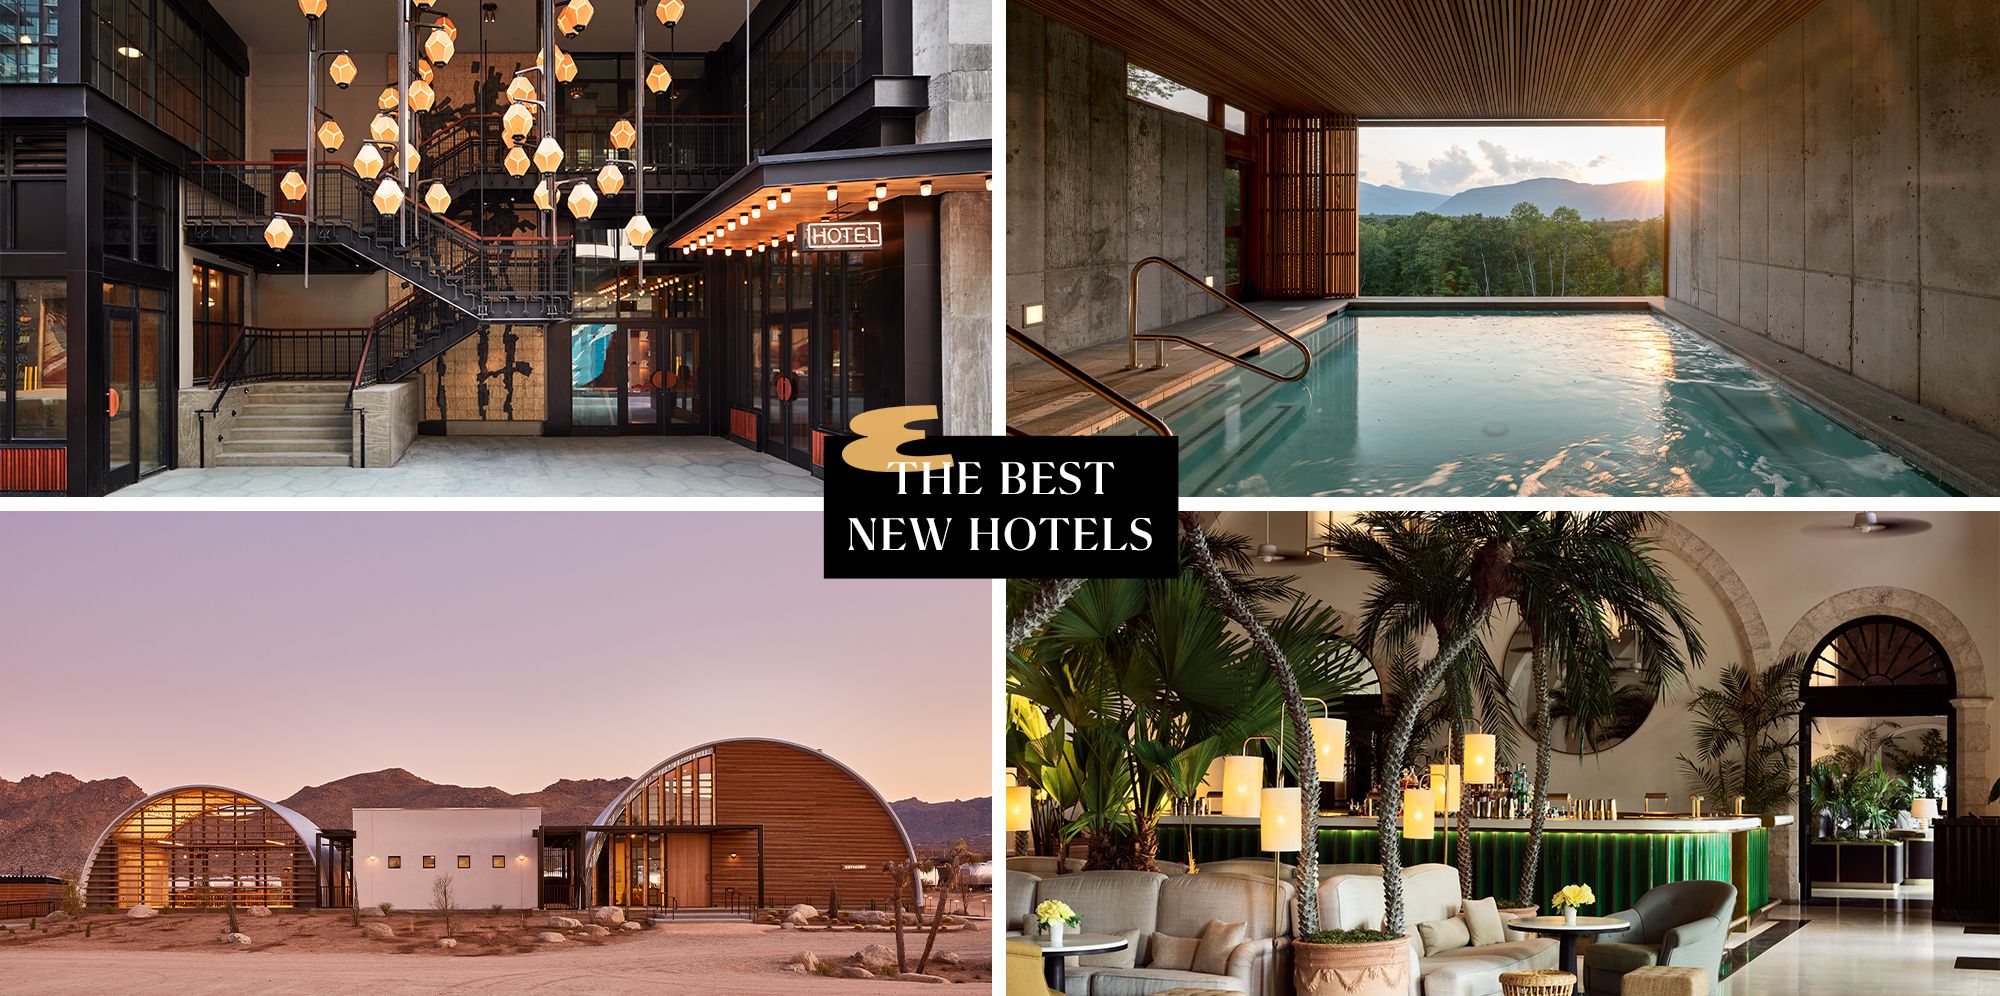 The Best New Hotels in North America and the Caribbean, 2022 image